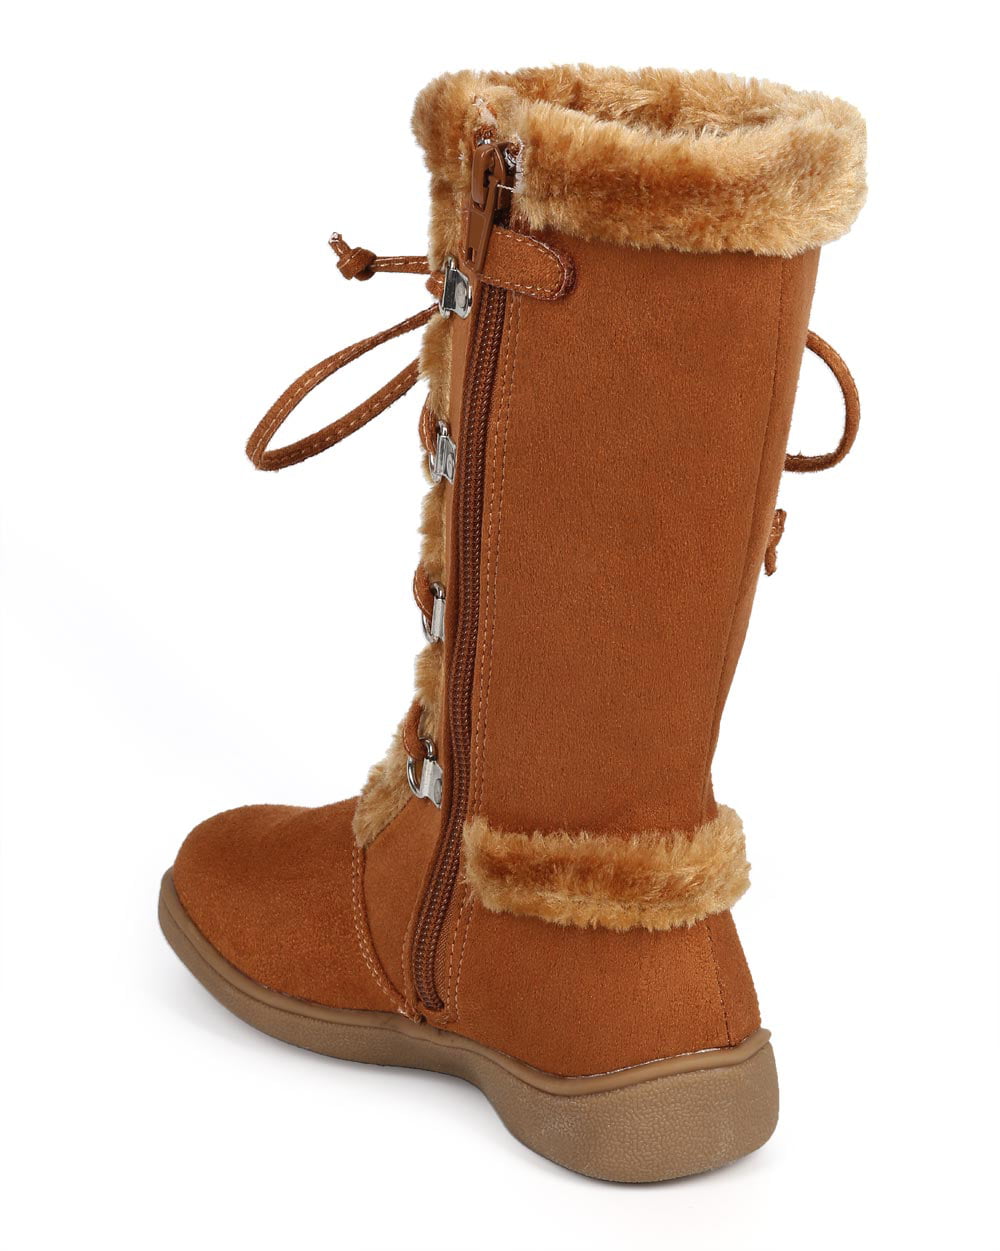 New Girl Little Angel Winter-866E Suede Fur Lace Up Zip Winter Boot Size 